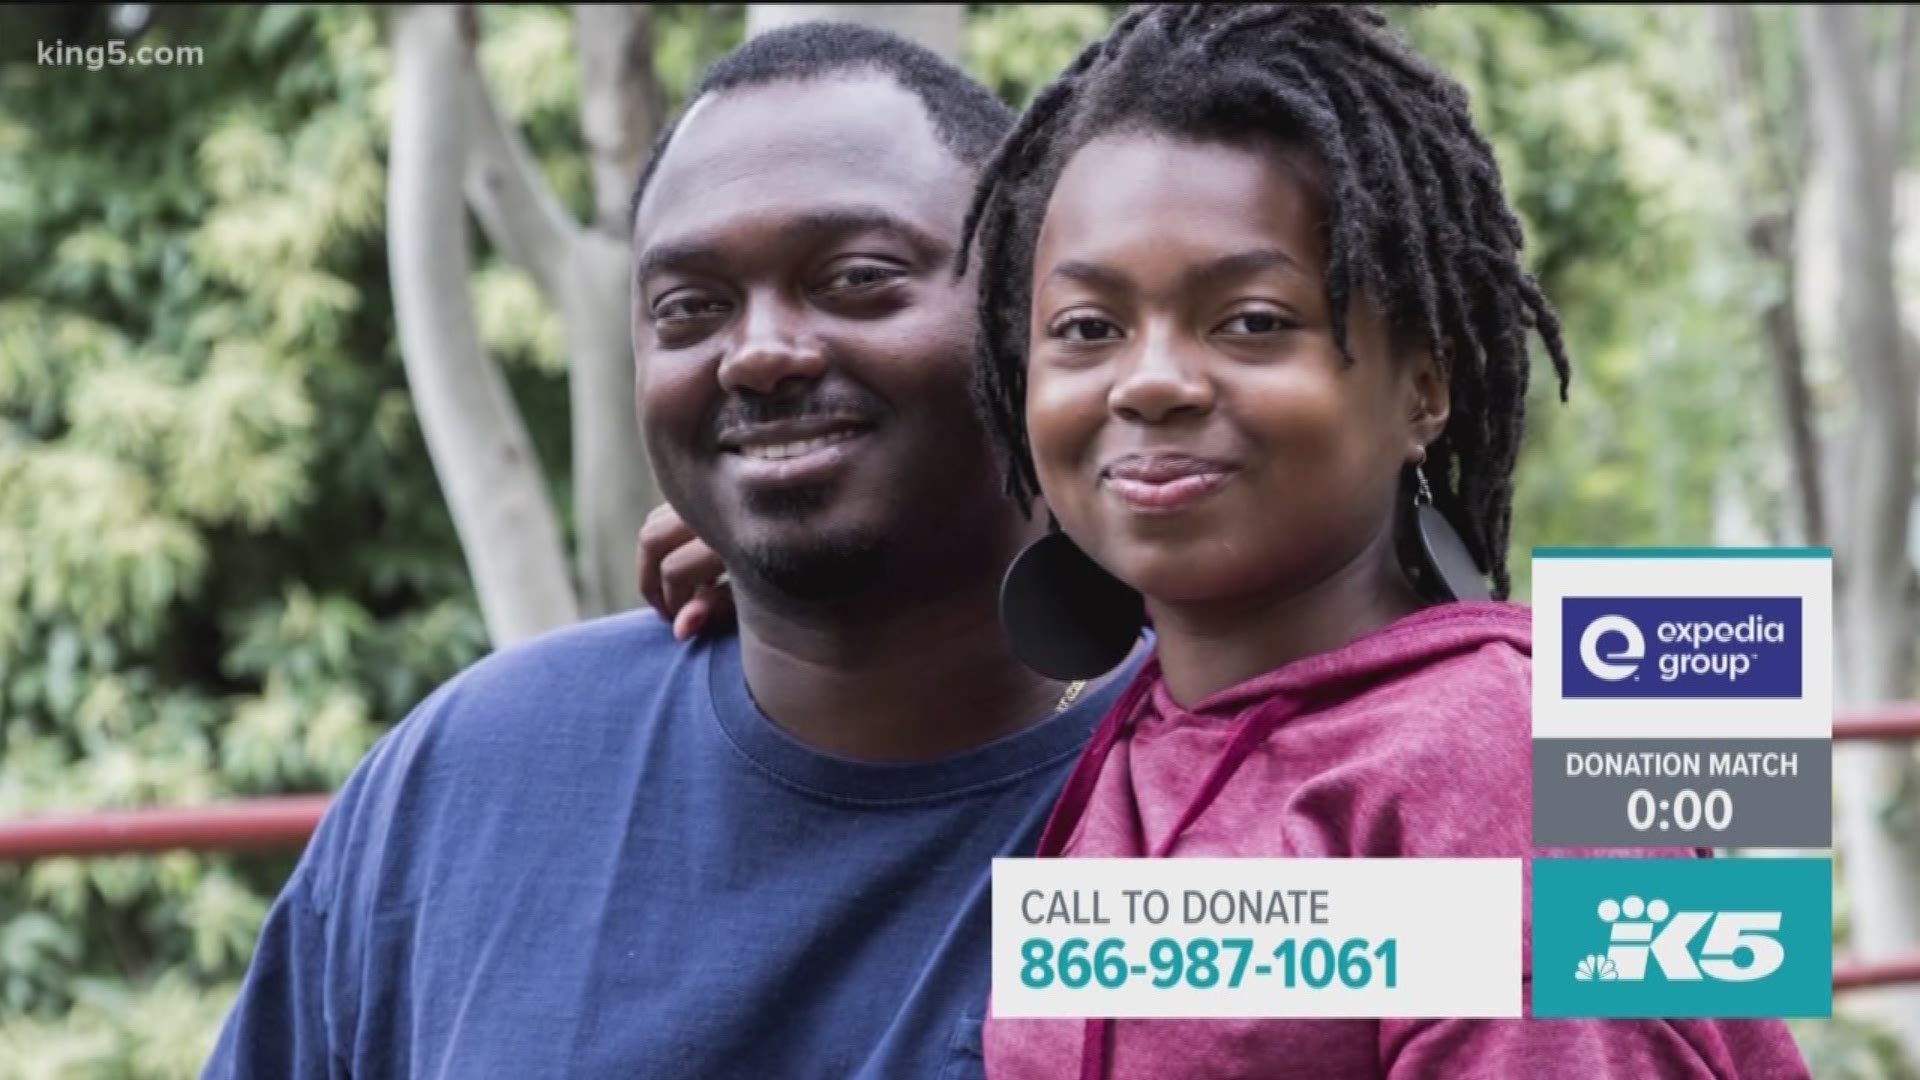 Odessa Brown Children's Clinic is a leader in treating sickle cell anemia as well as chronic health conditions like asthma and obesity. This story is sponsored by Seattle Children's.